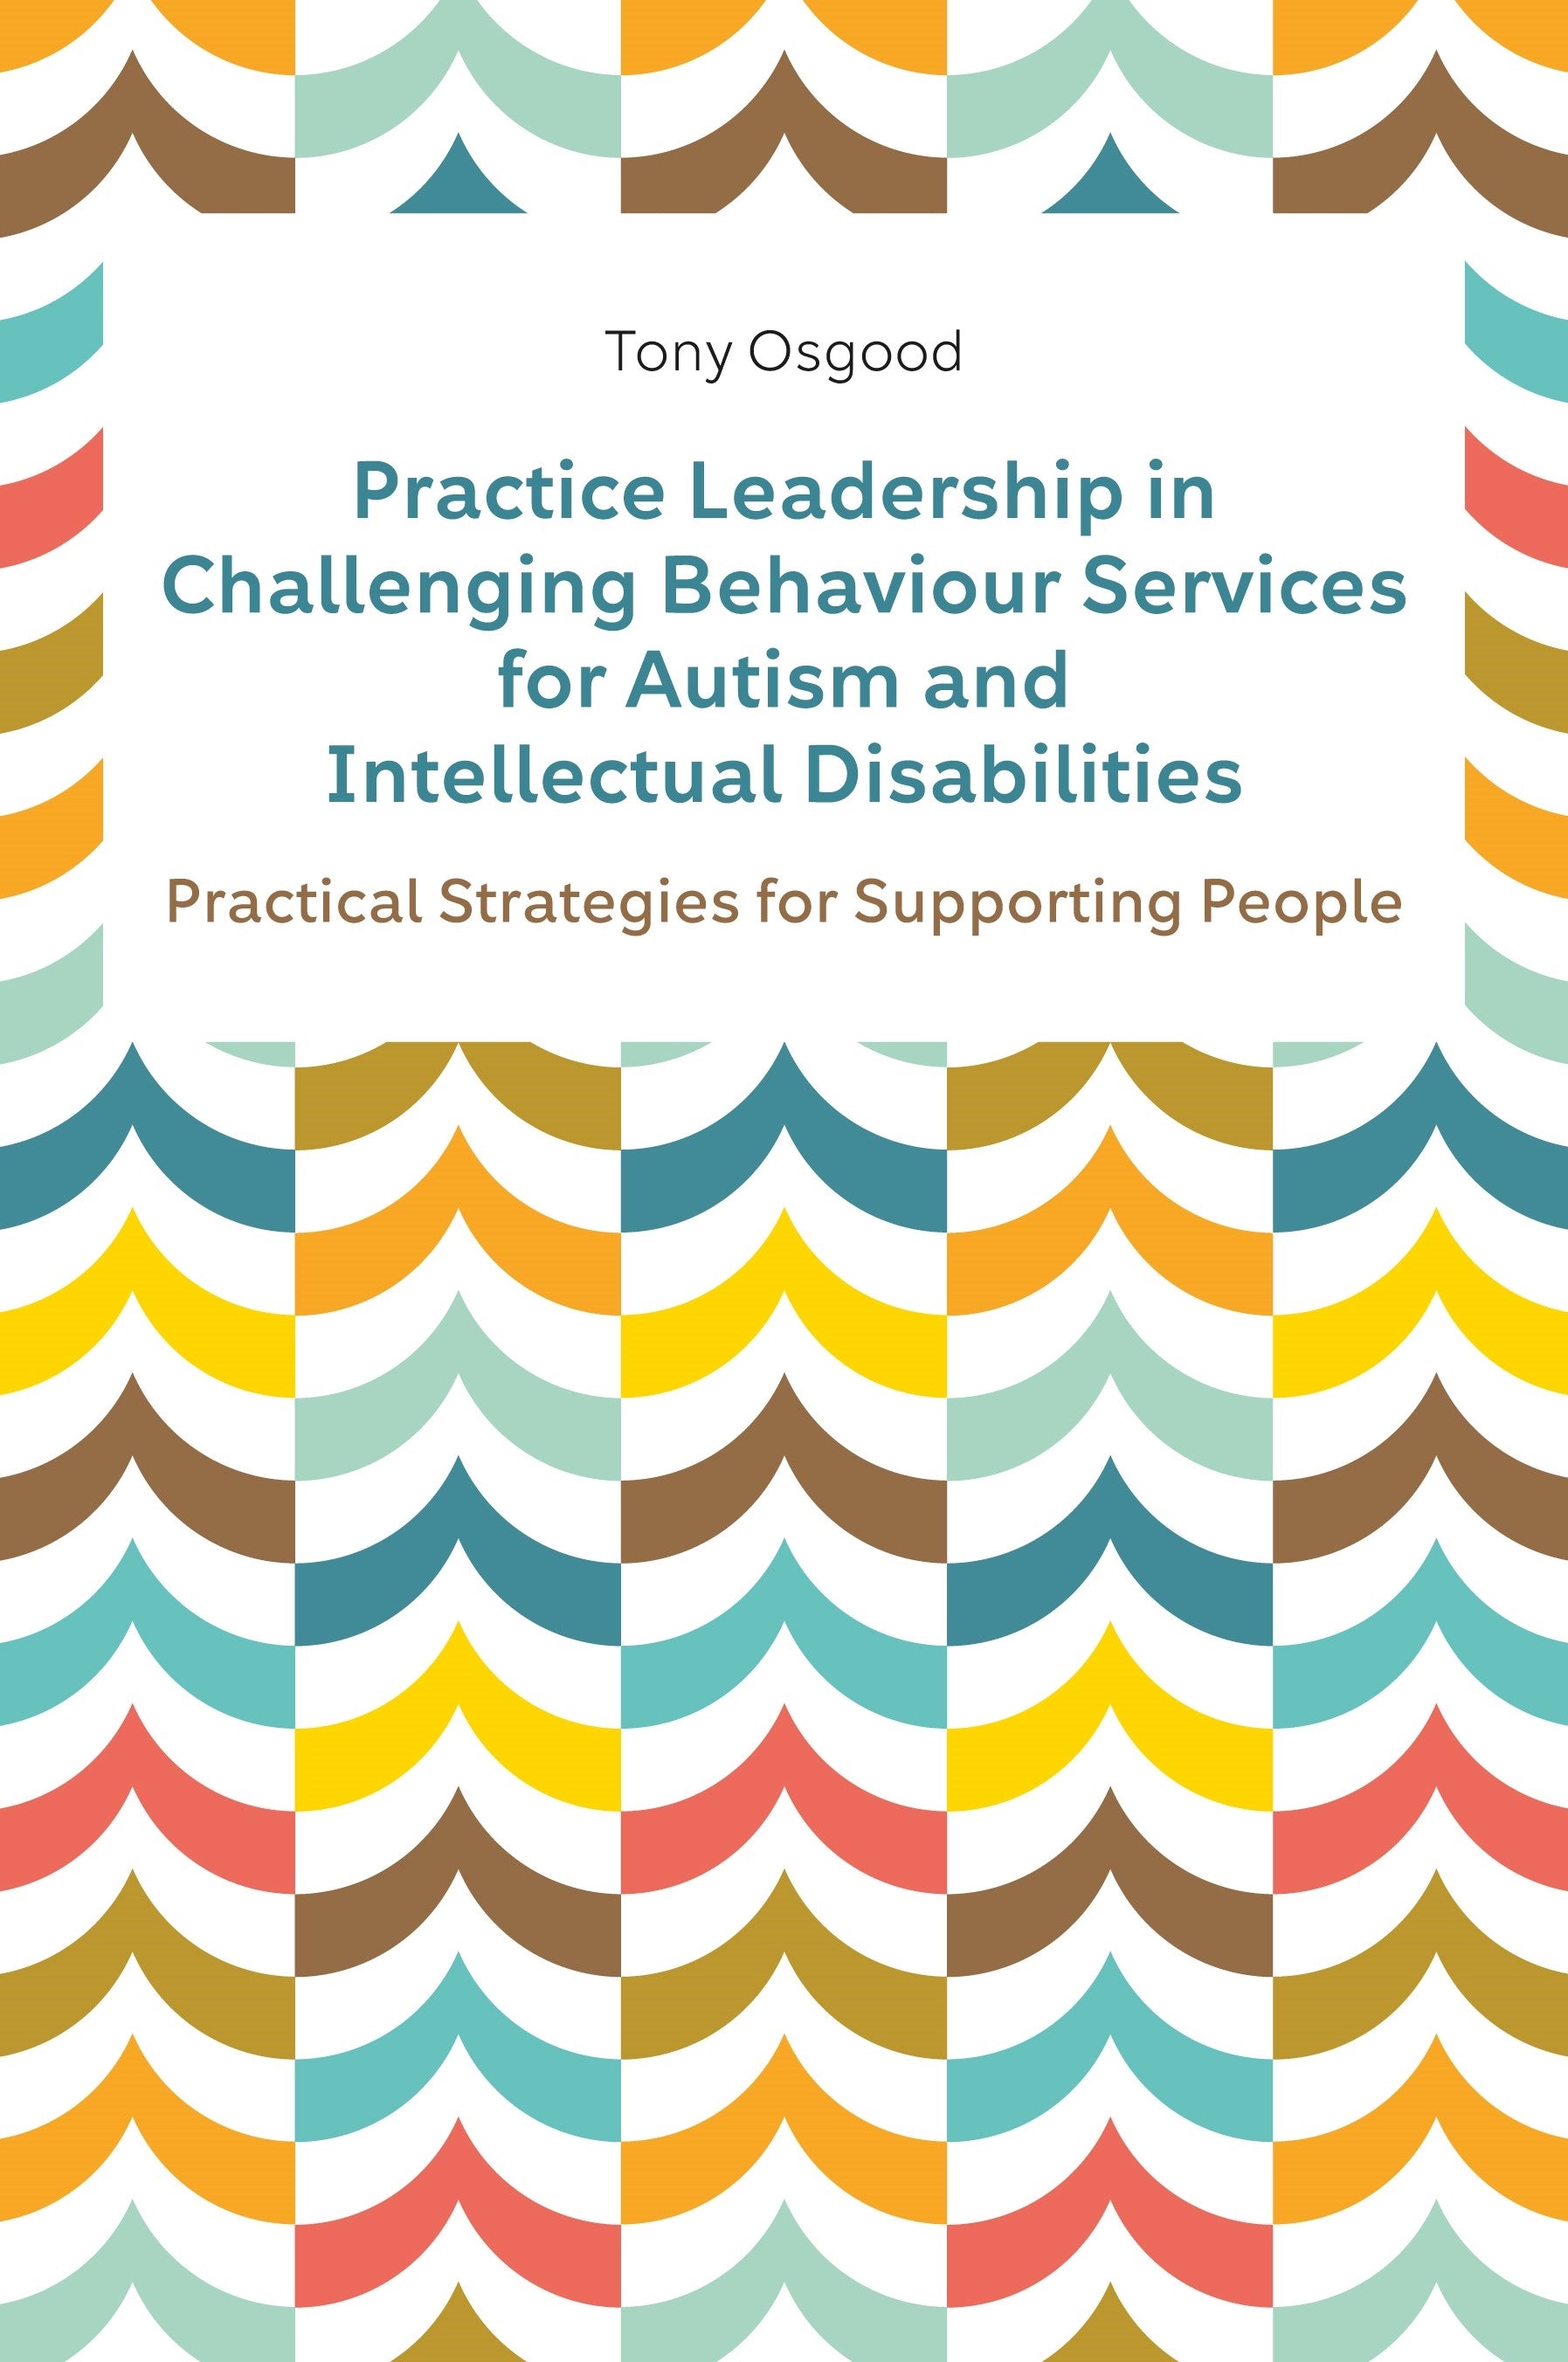 Practice Leadership in Challenging Behaviour Services for Autism and Intellectual Disabilities by Tony Osgood